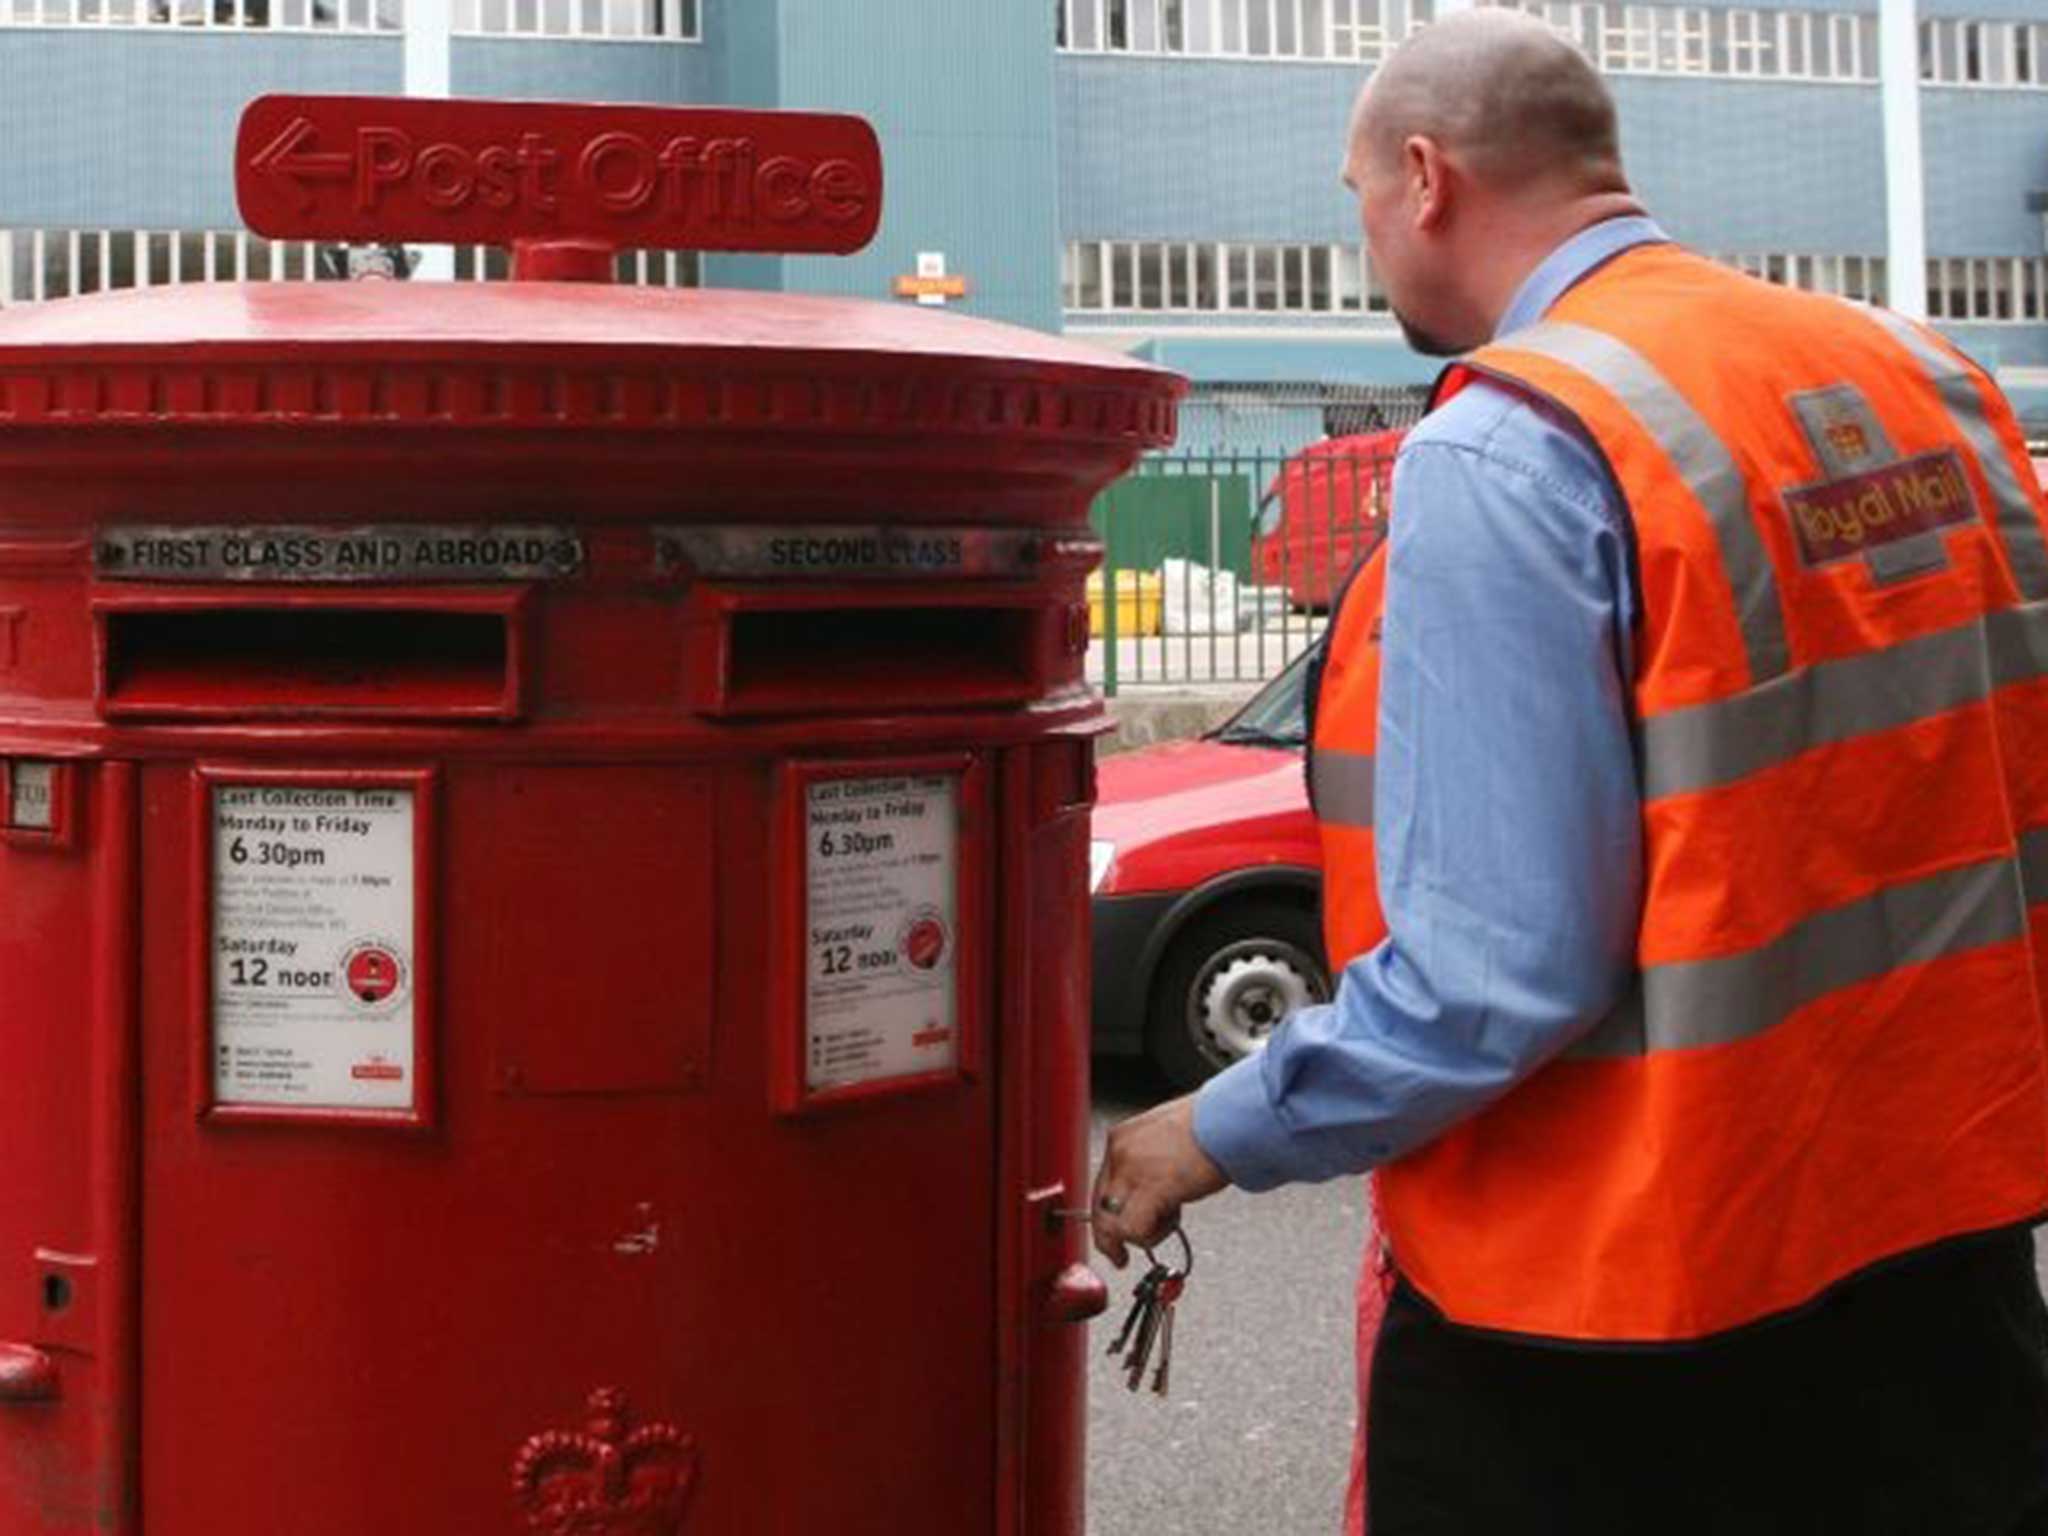 Ofcom has hinted that it will have to tighten price controls on Royal Mail, which were relaxed in 2012 to help Royal Mail to operate in a challenging market